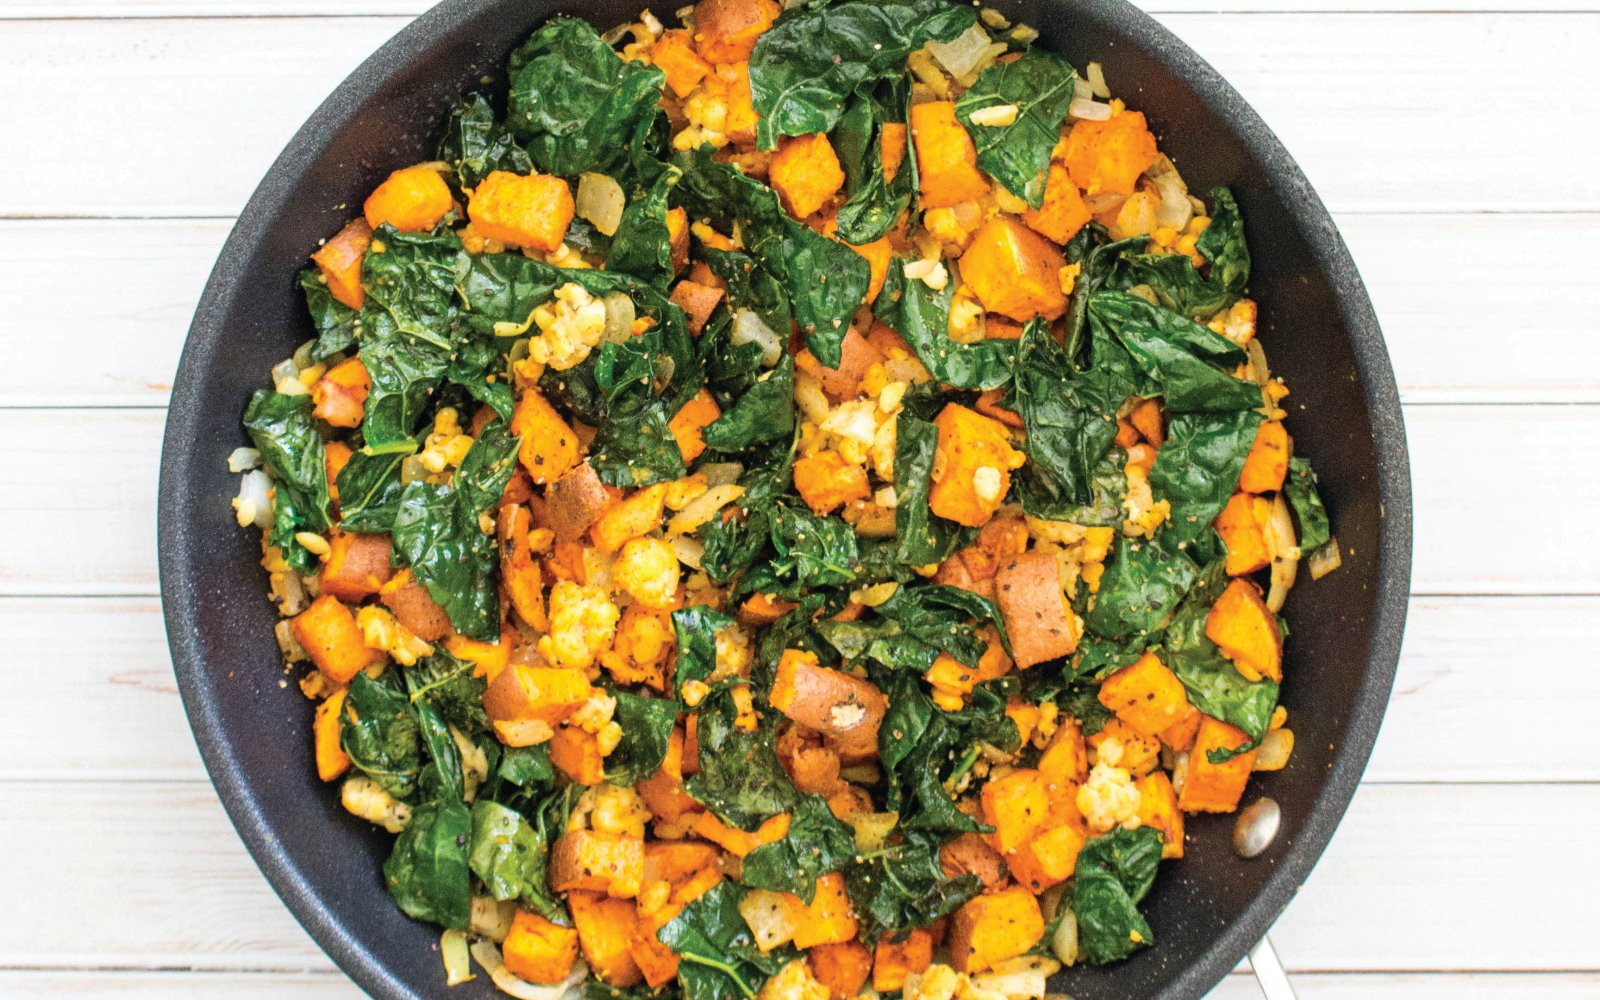 10 Plant-Based High-Protein Recipes to Help Build and Strengthen Muscles